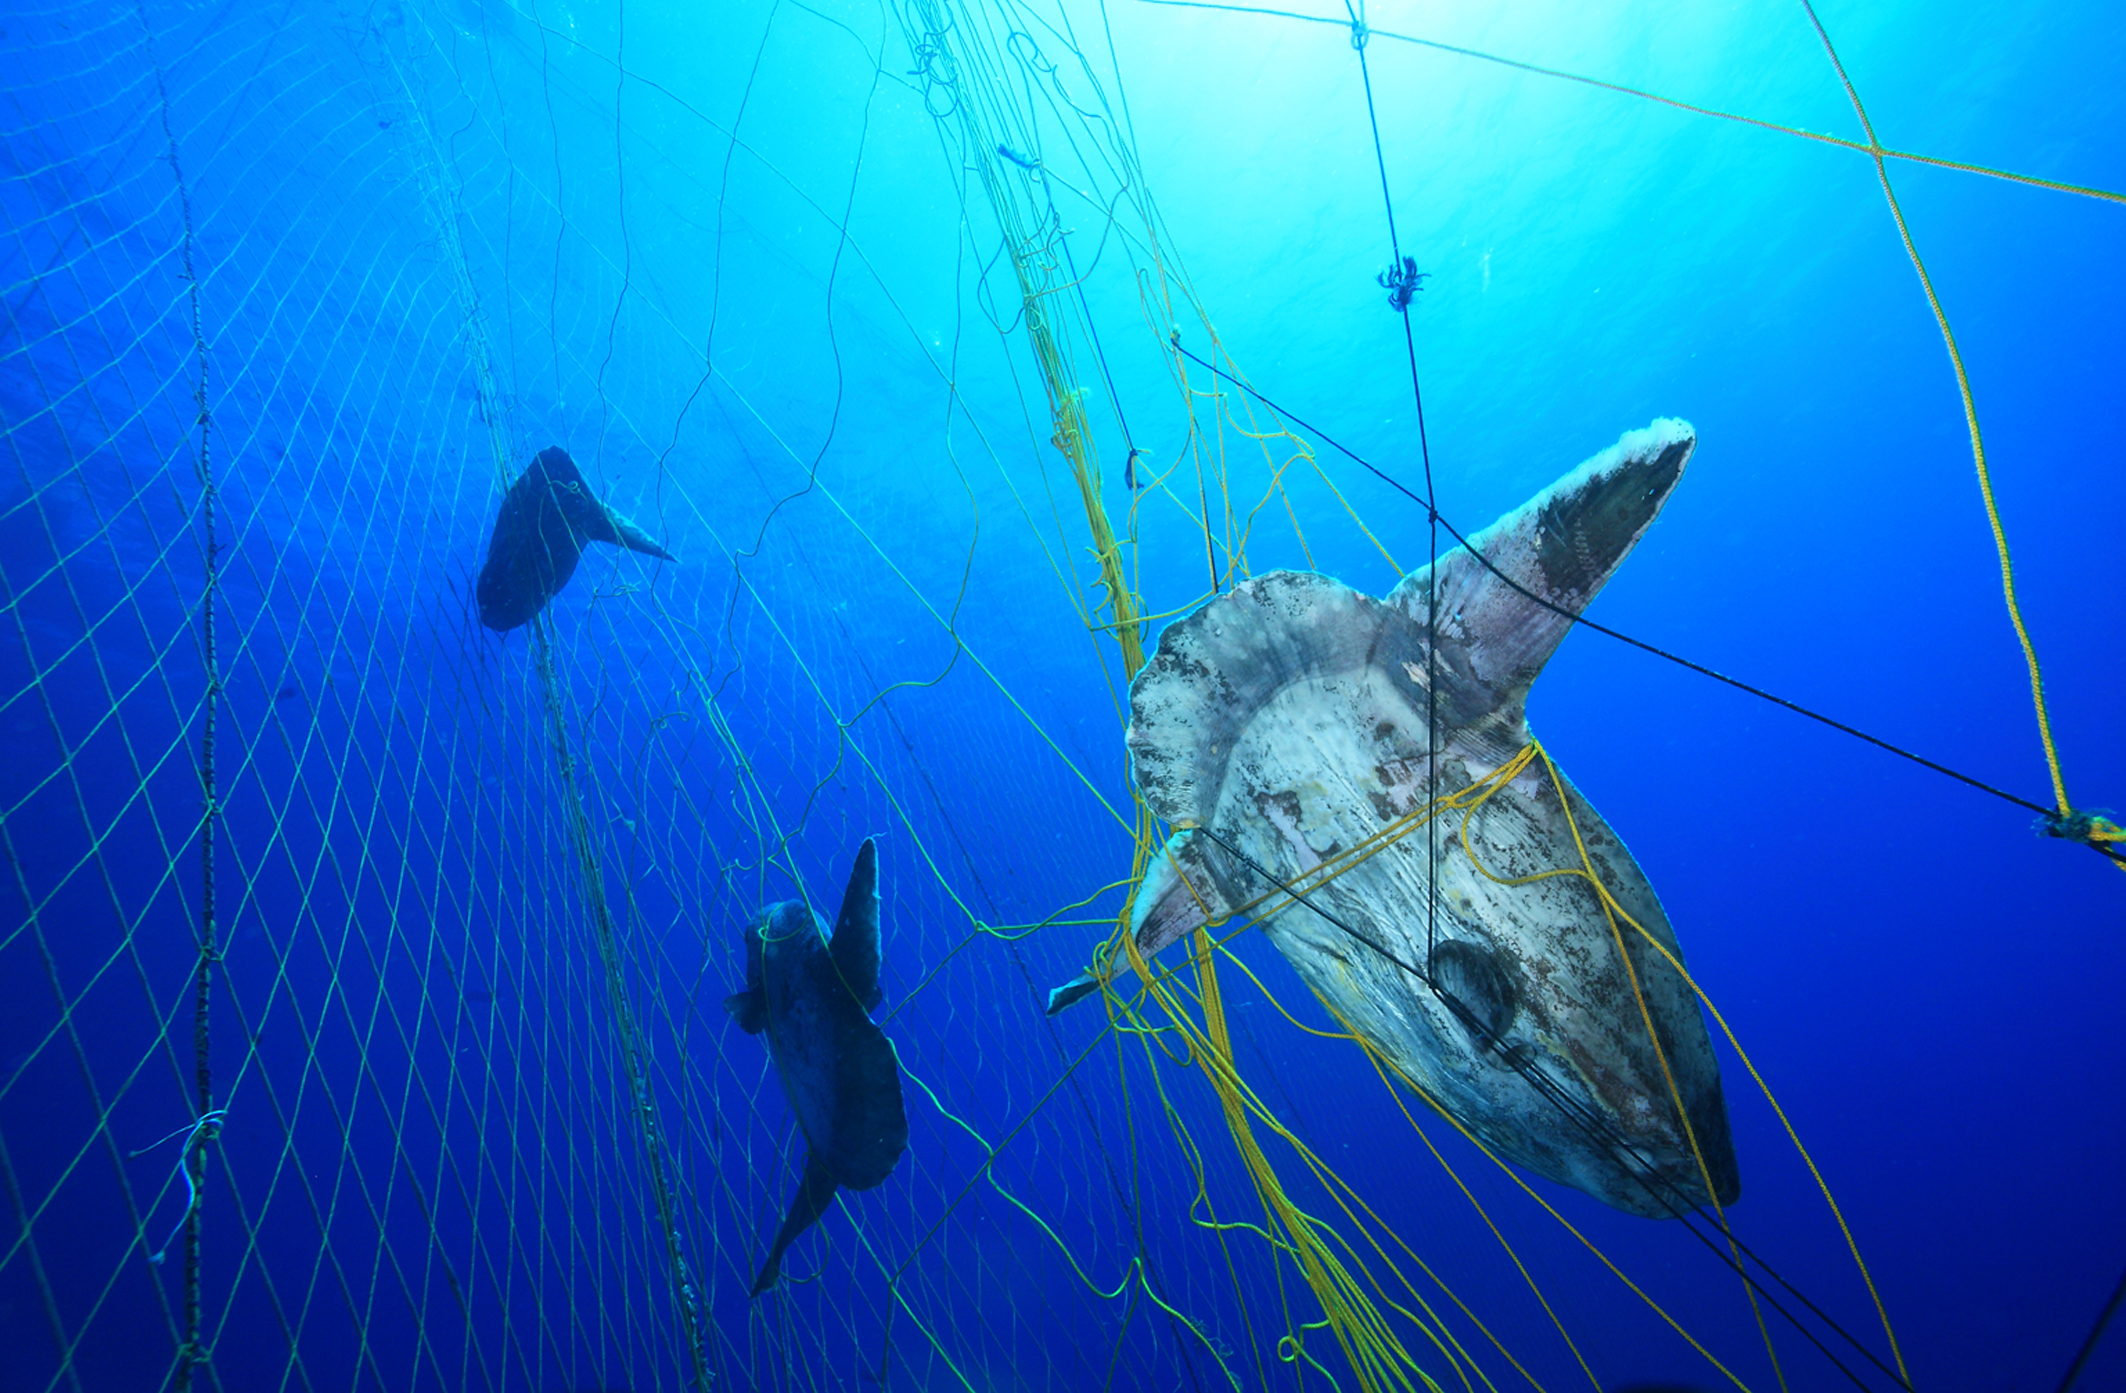 Gillnets are not a sustainable fishing method, catching these sunfish as bycatch when targeting tuna.